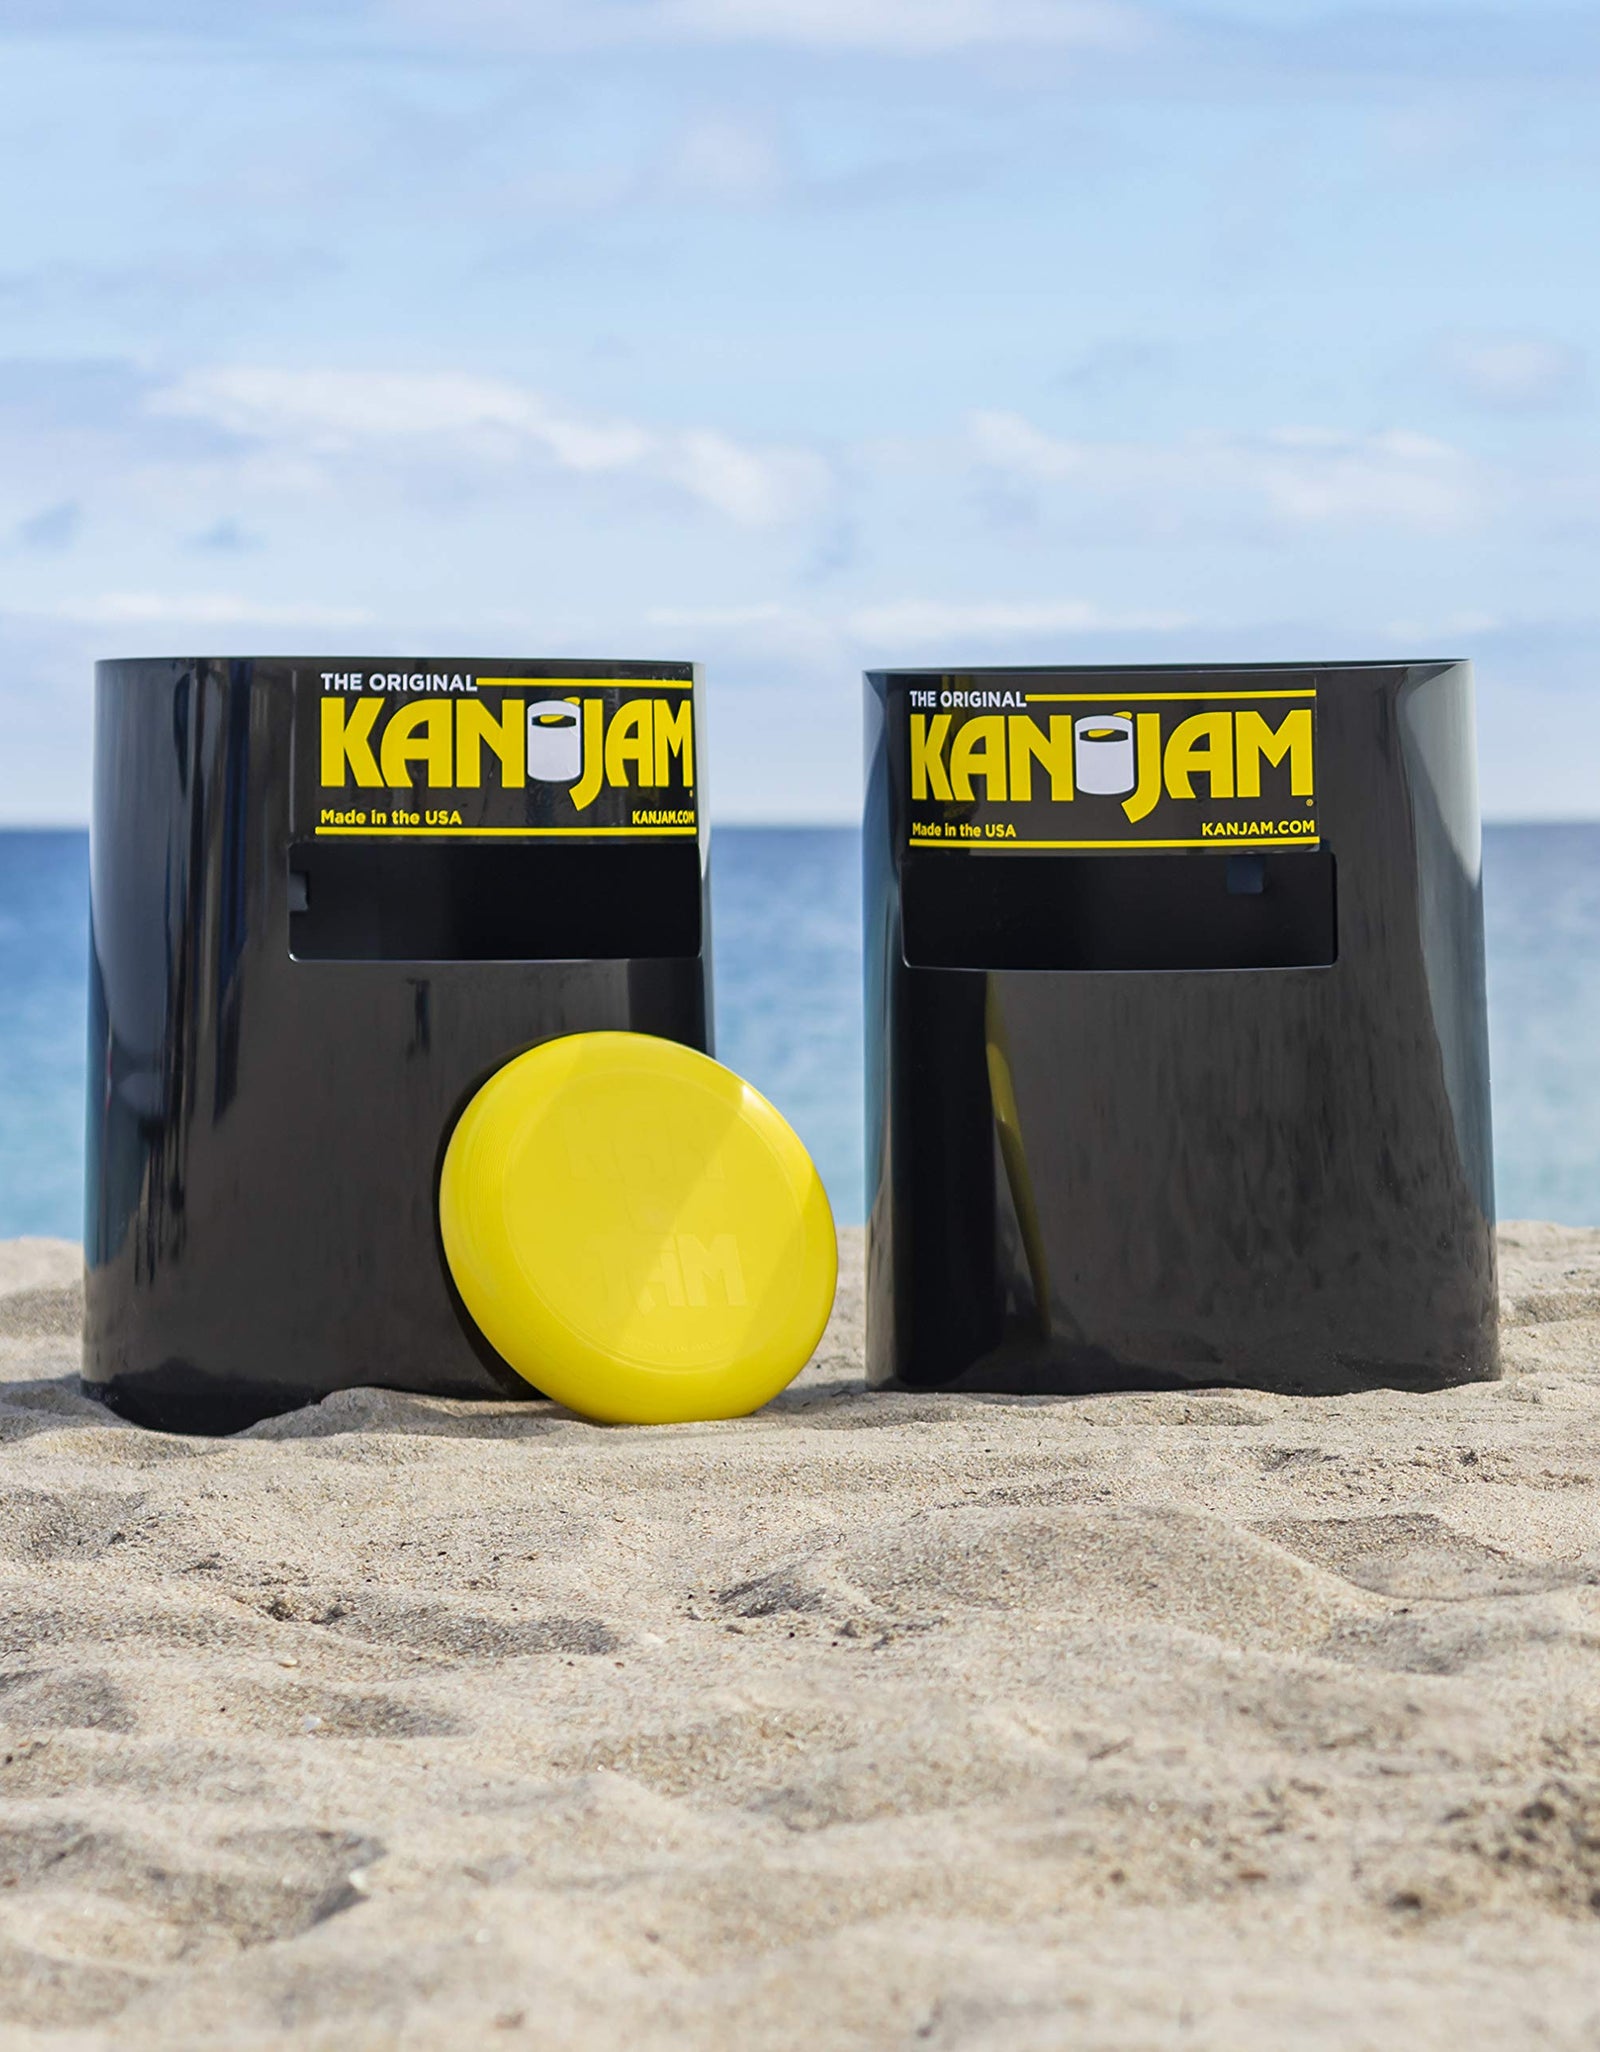 Kan Jam Original Disc Throwing Game - Great for Outdoors, Beach, Backyard and Tailgate, Made in the USA, Multiple Colors and Options